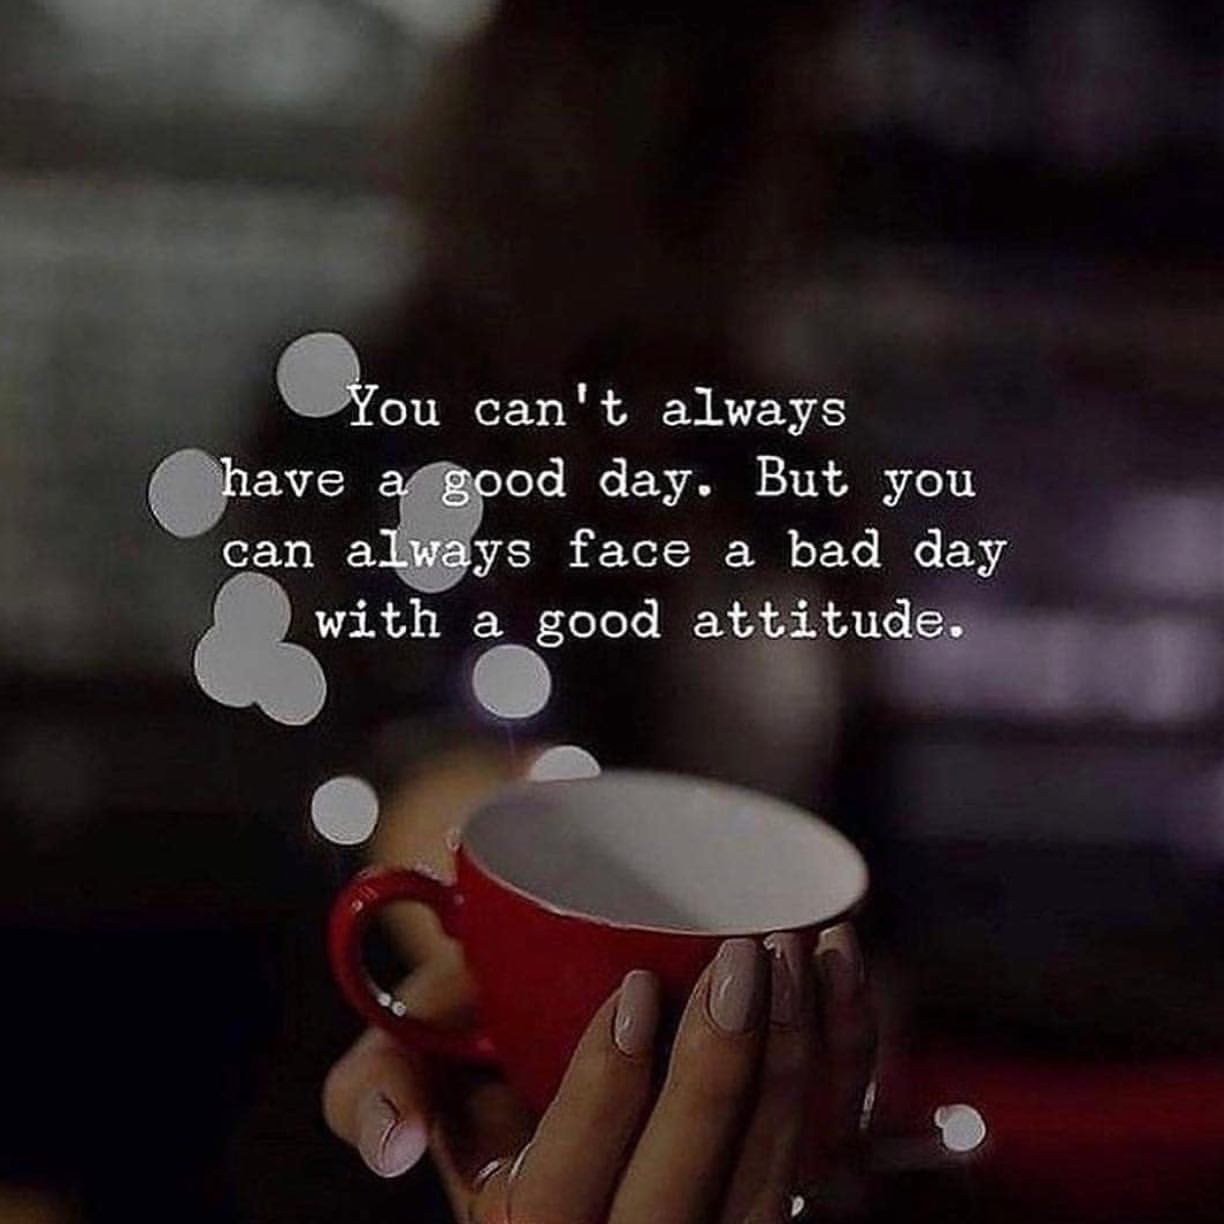 You can't always have a good day. But you can always face a bad day with a good attitude.